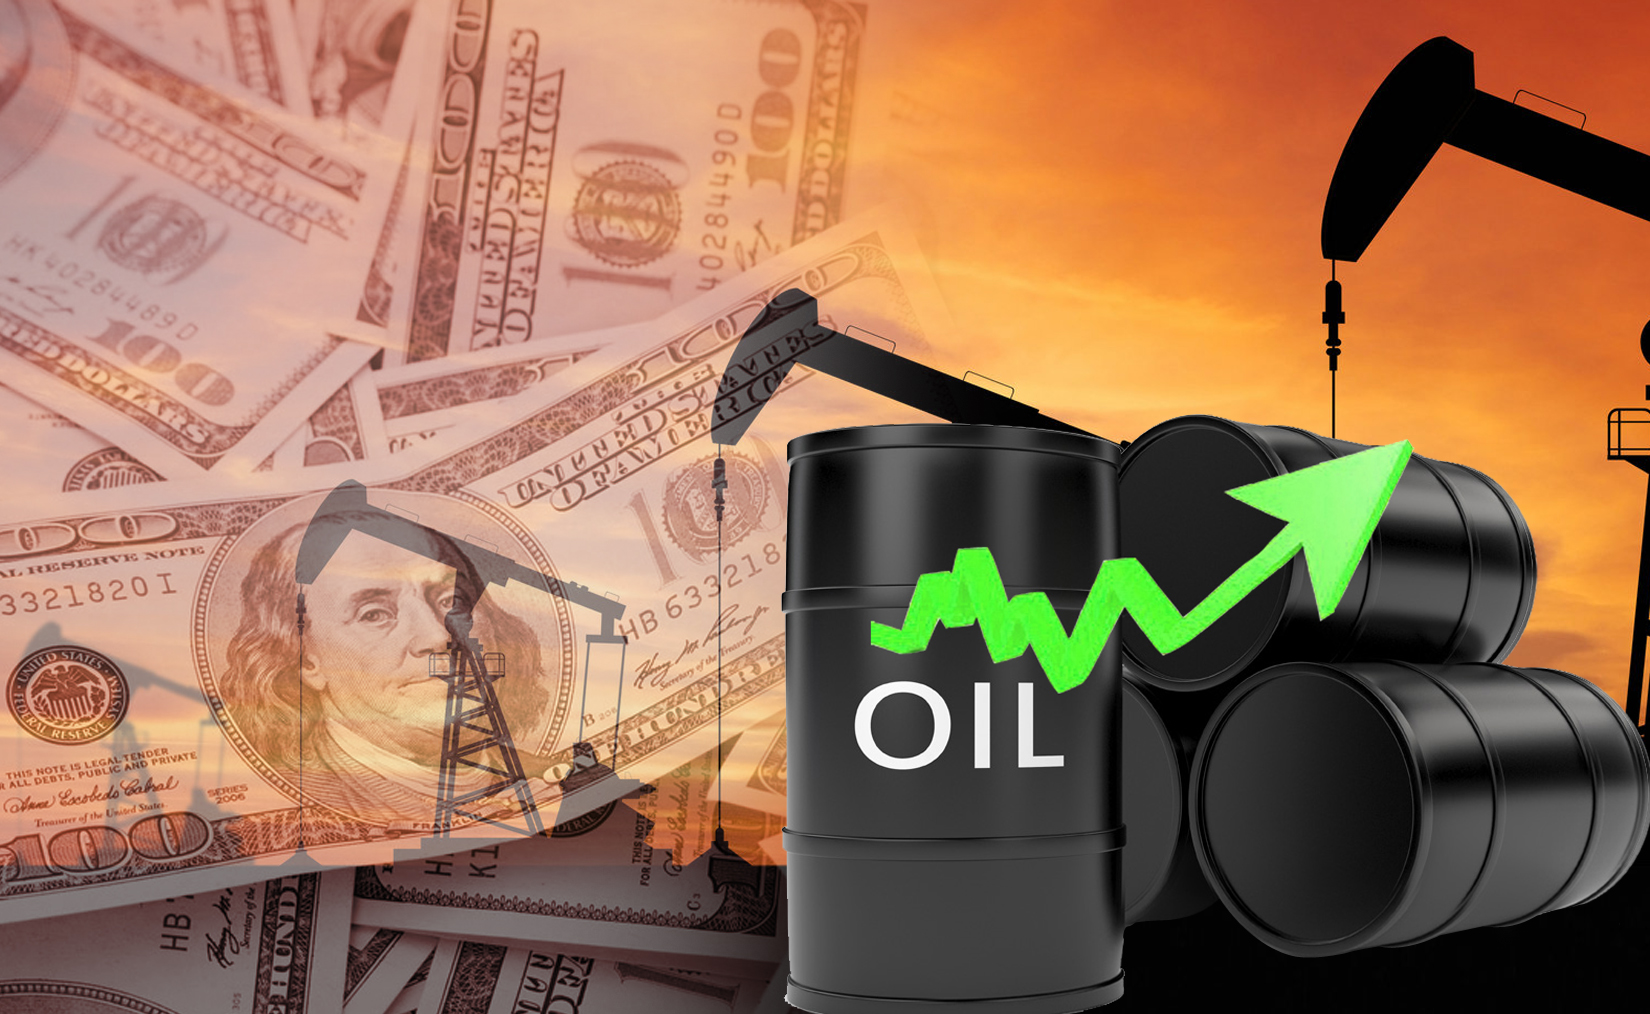 Kuwaiti oil price up 70 cents to stand at USD 59.88 per barrel                                                                                                                                                                                            